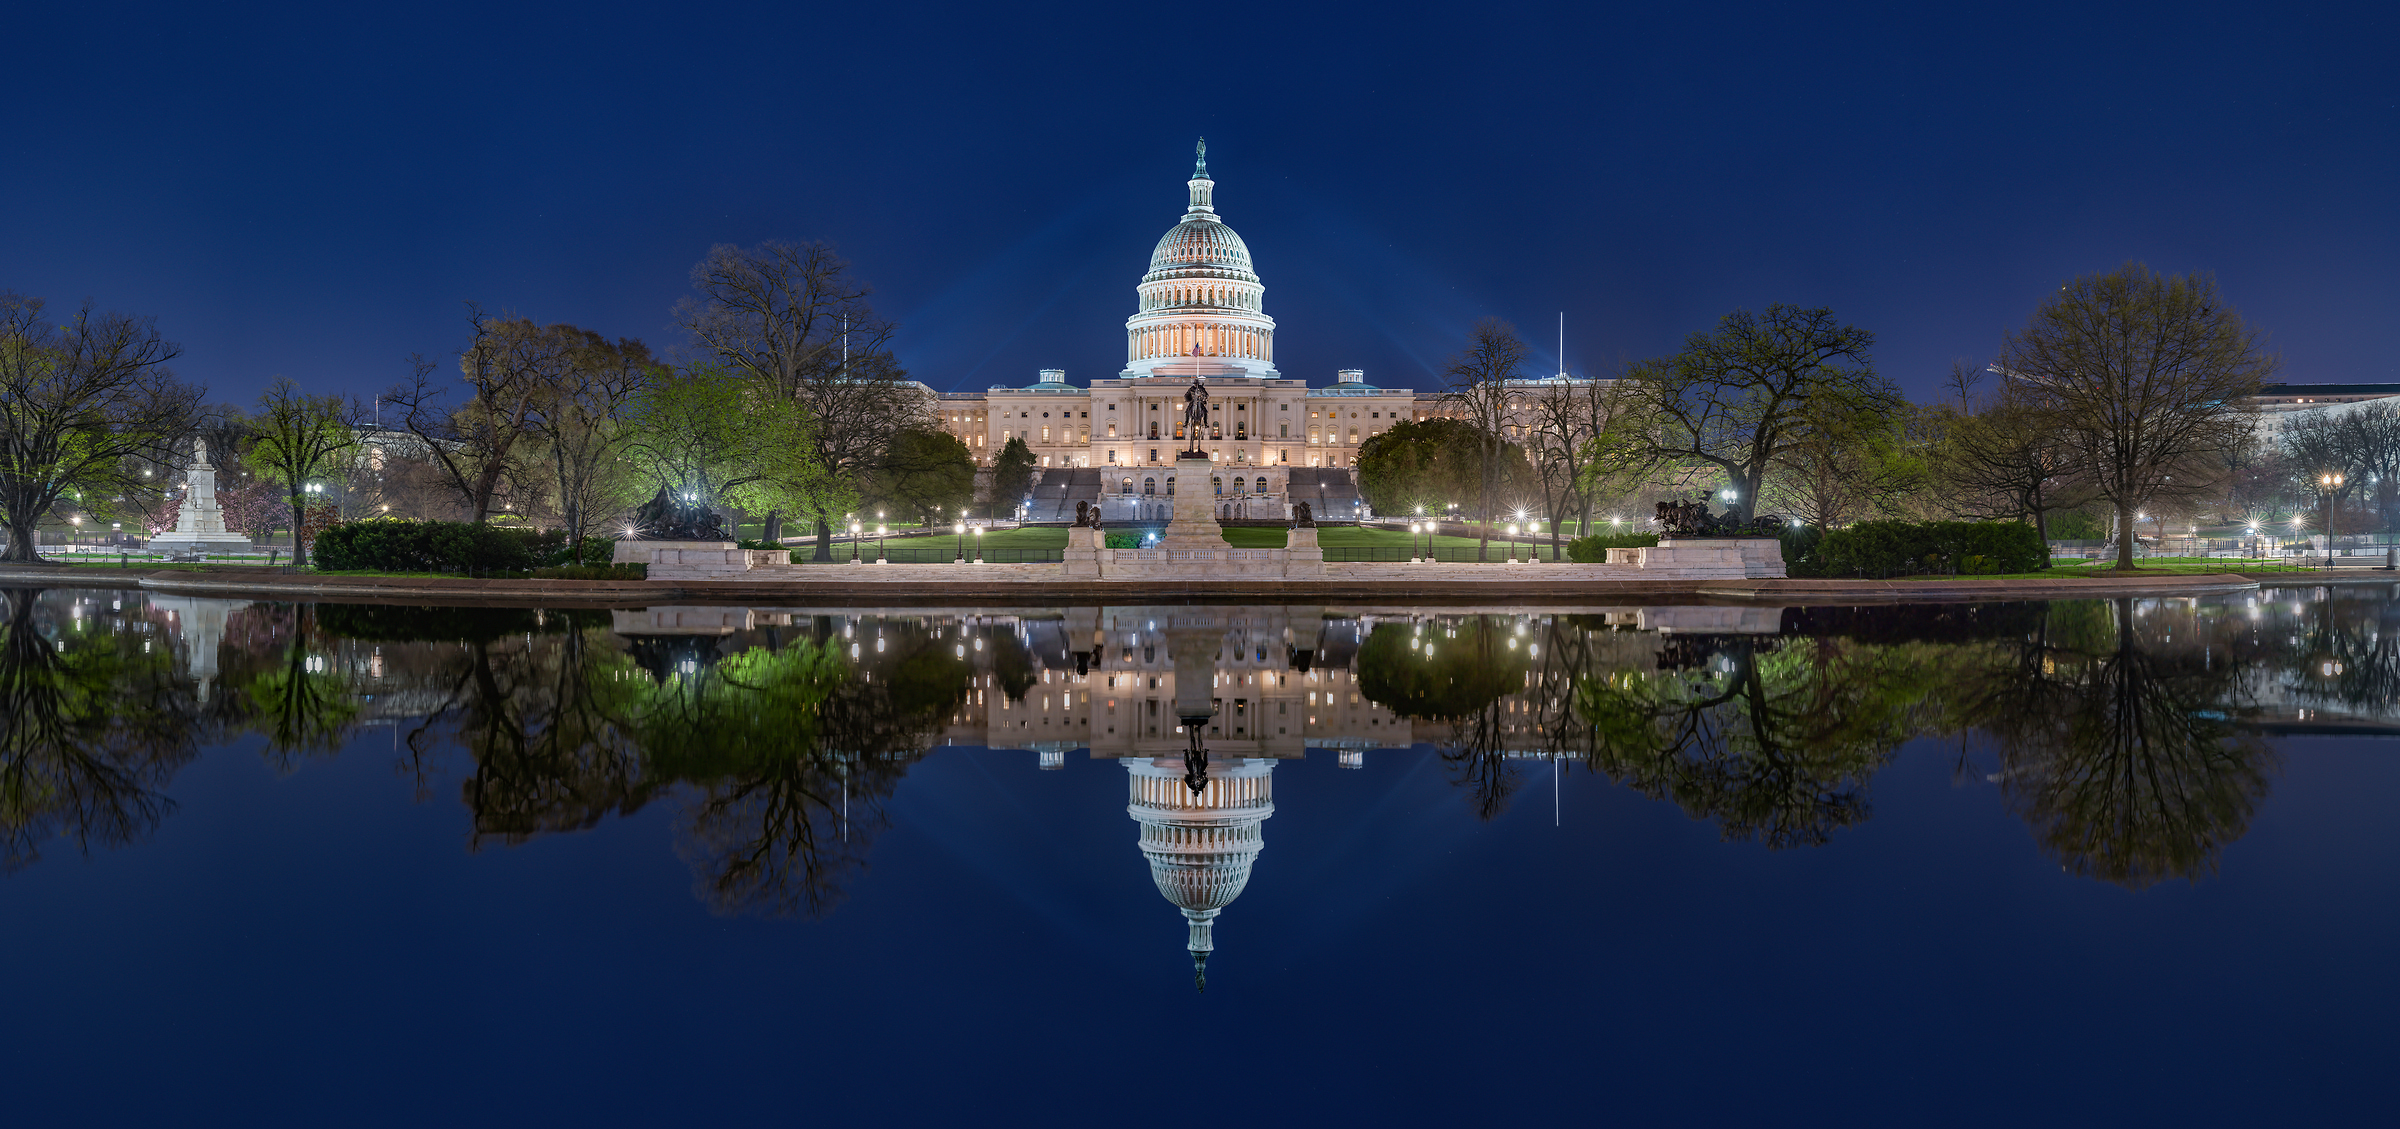 1,567 megapixels! A very high resolution, large-format VAST photo print of the U.S. Capitol Building in front of the Reflecting Pool on the National Mall; photograph created by Tim Lo Monaco on the United States Capitol Grounds, Washington, D.C.